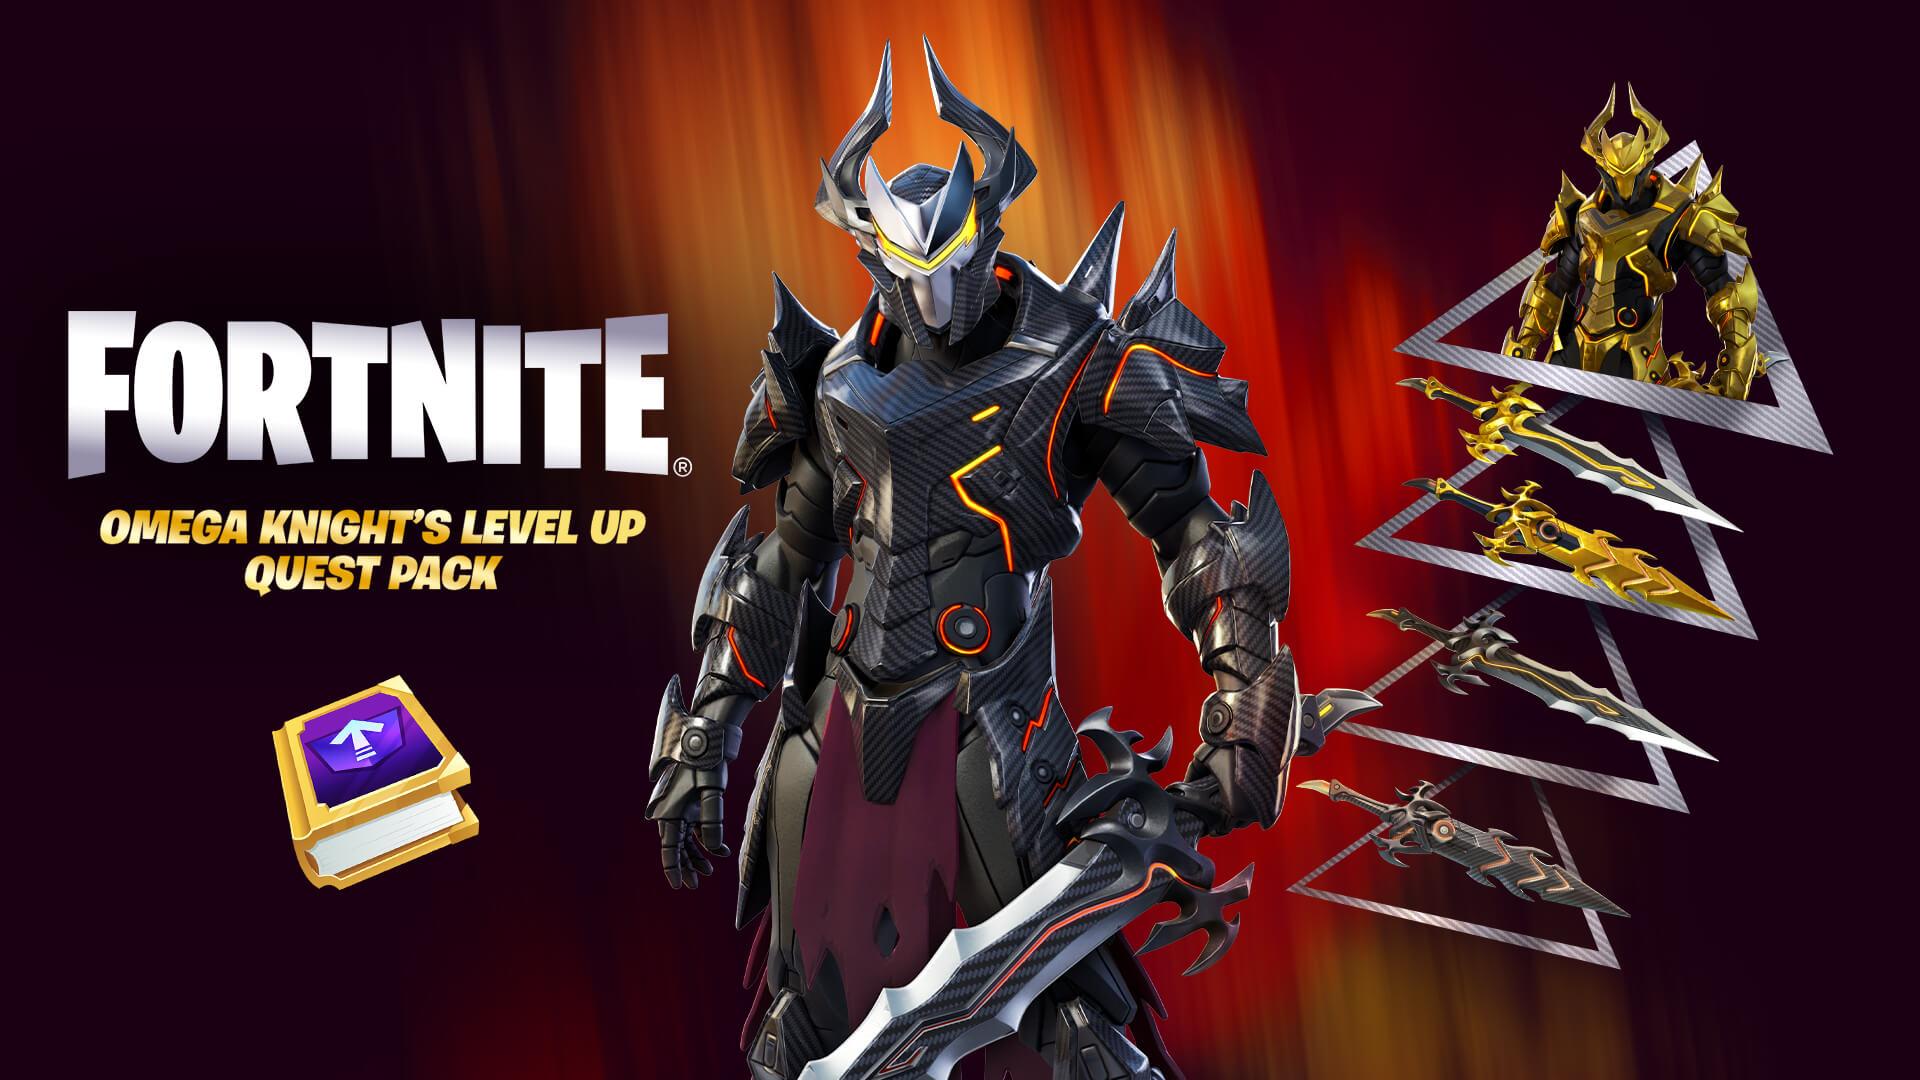 omega knights level up quest pack in fortnite 1920x1080 74dd77bc2238 1